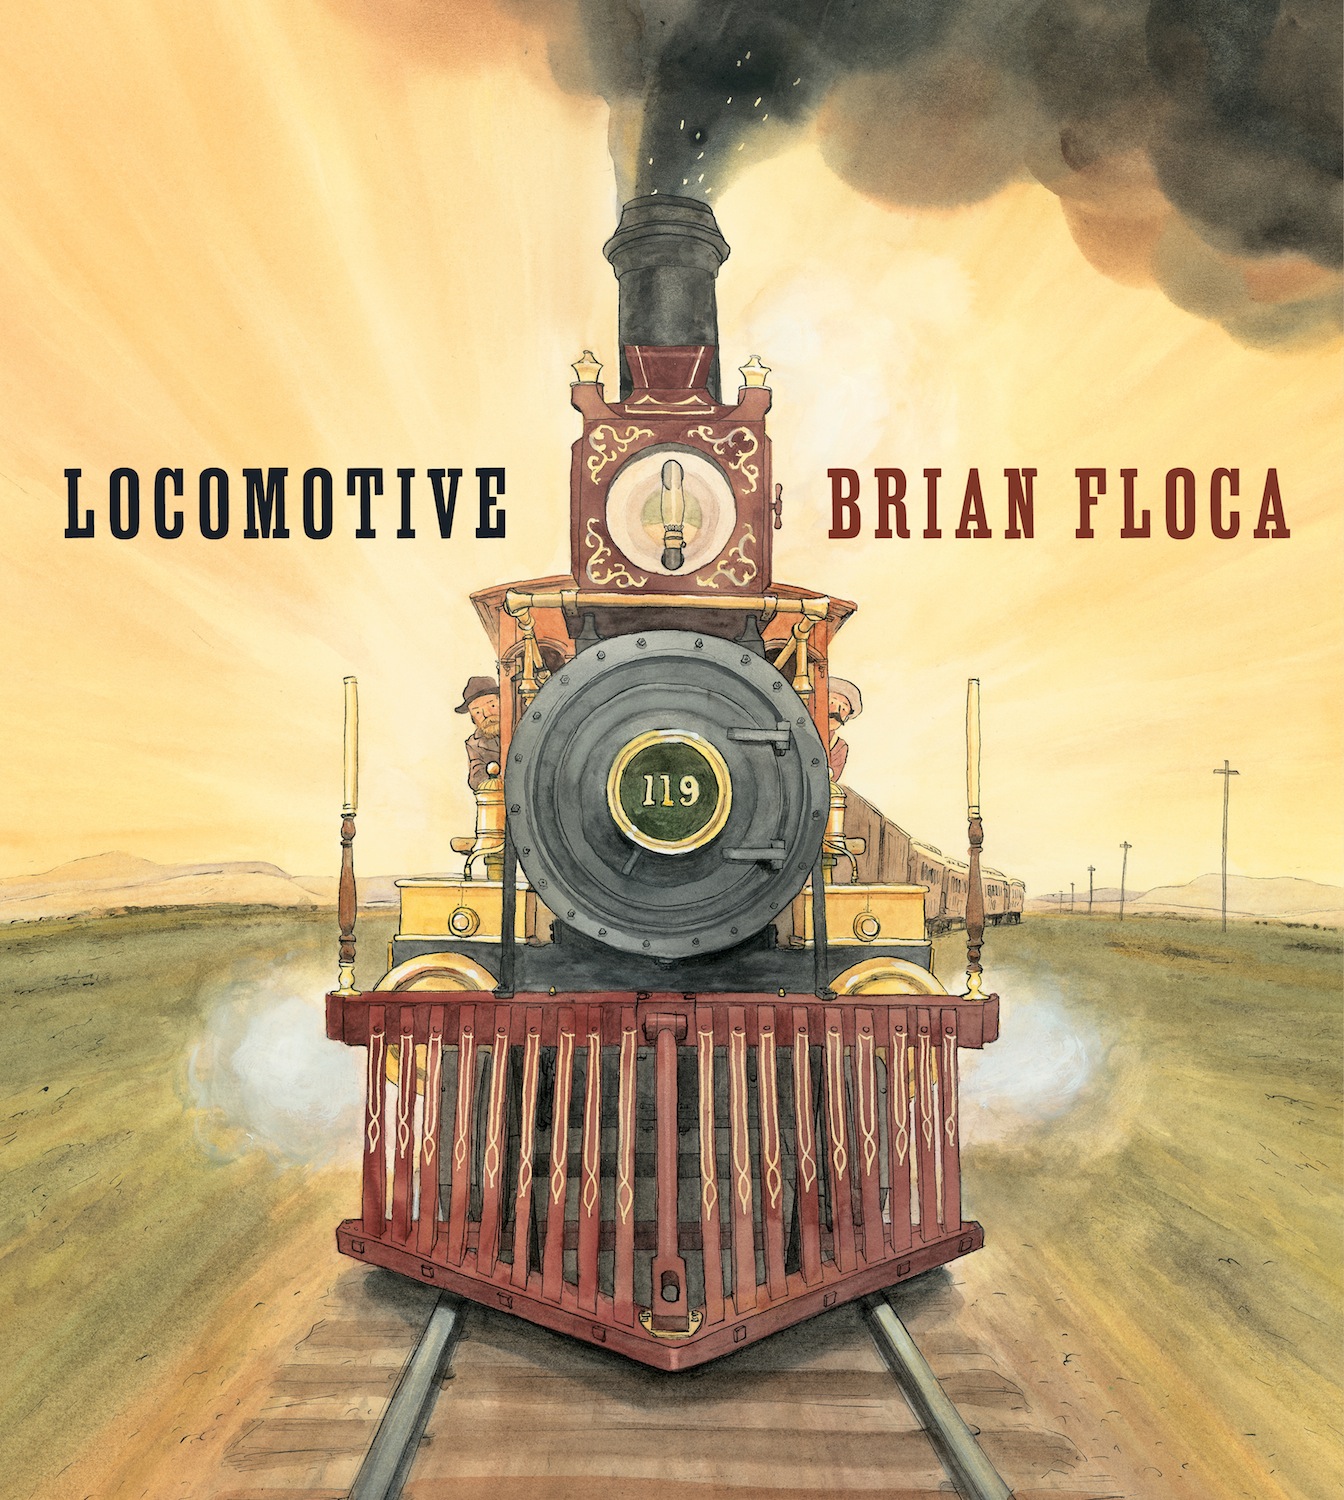 Story Time with Brian Floca (author/illustrator of Locomotive)